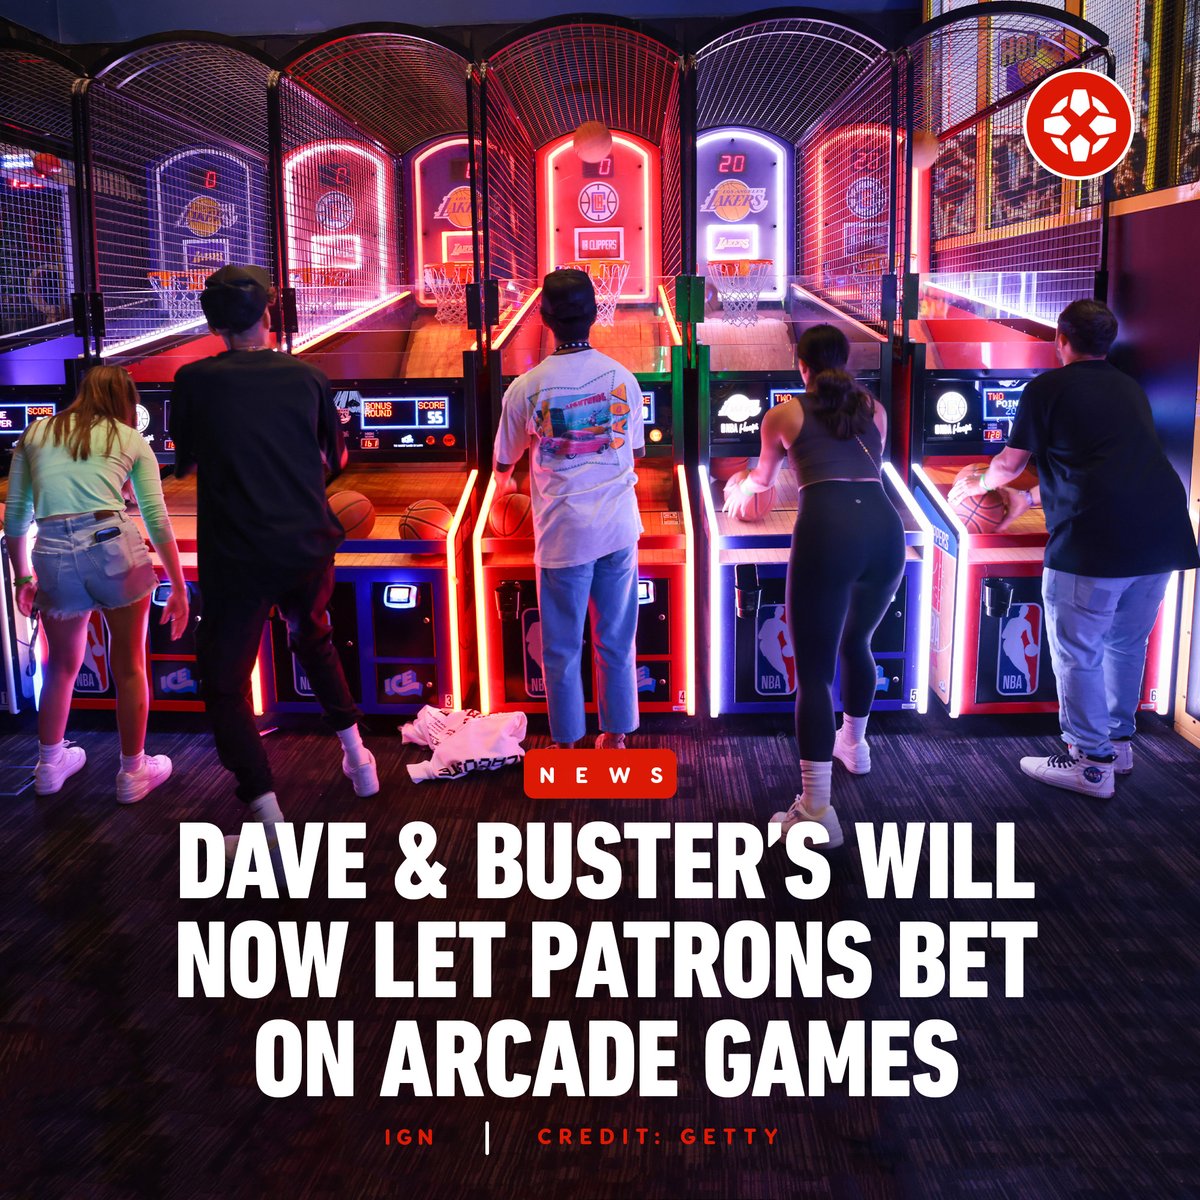 Dave & Buster’s has partnered with Lucra to bring betting to the Dave & Buster’s app, where loyalty members can also earn rewards and exclusive perks while competing.